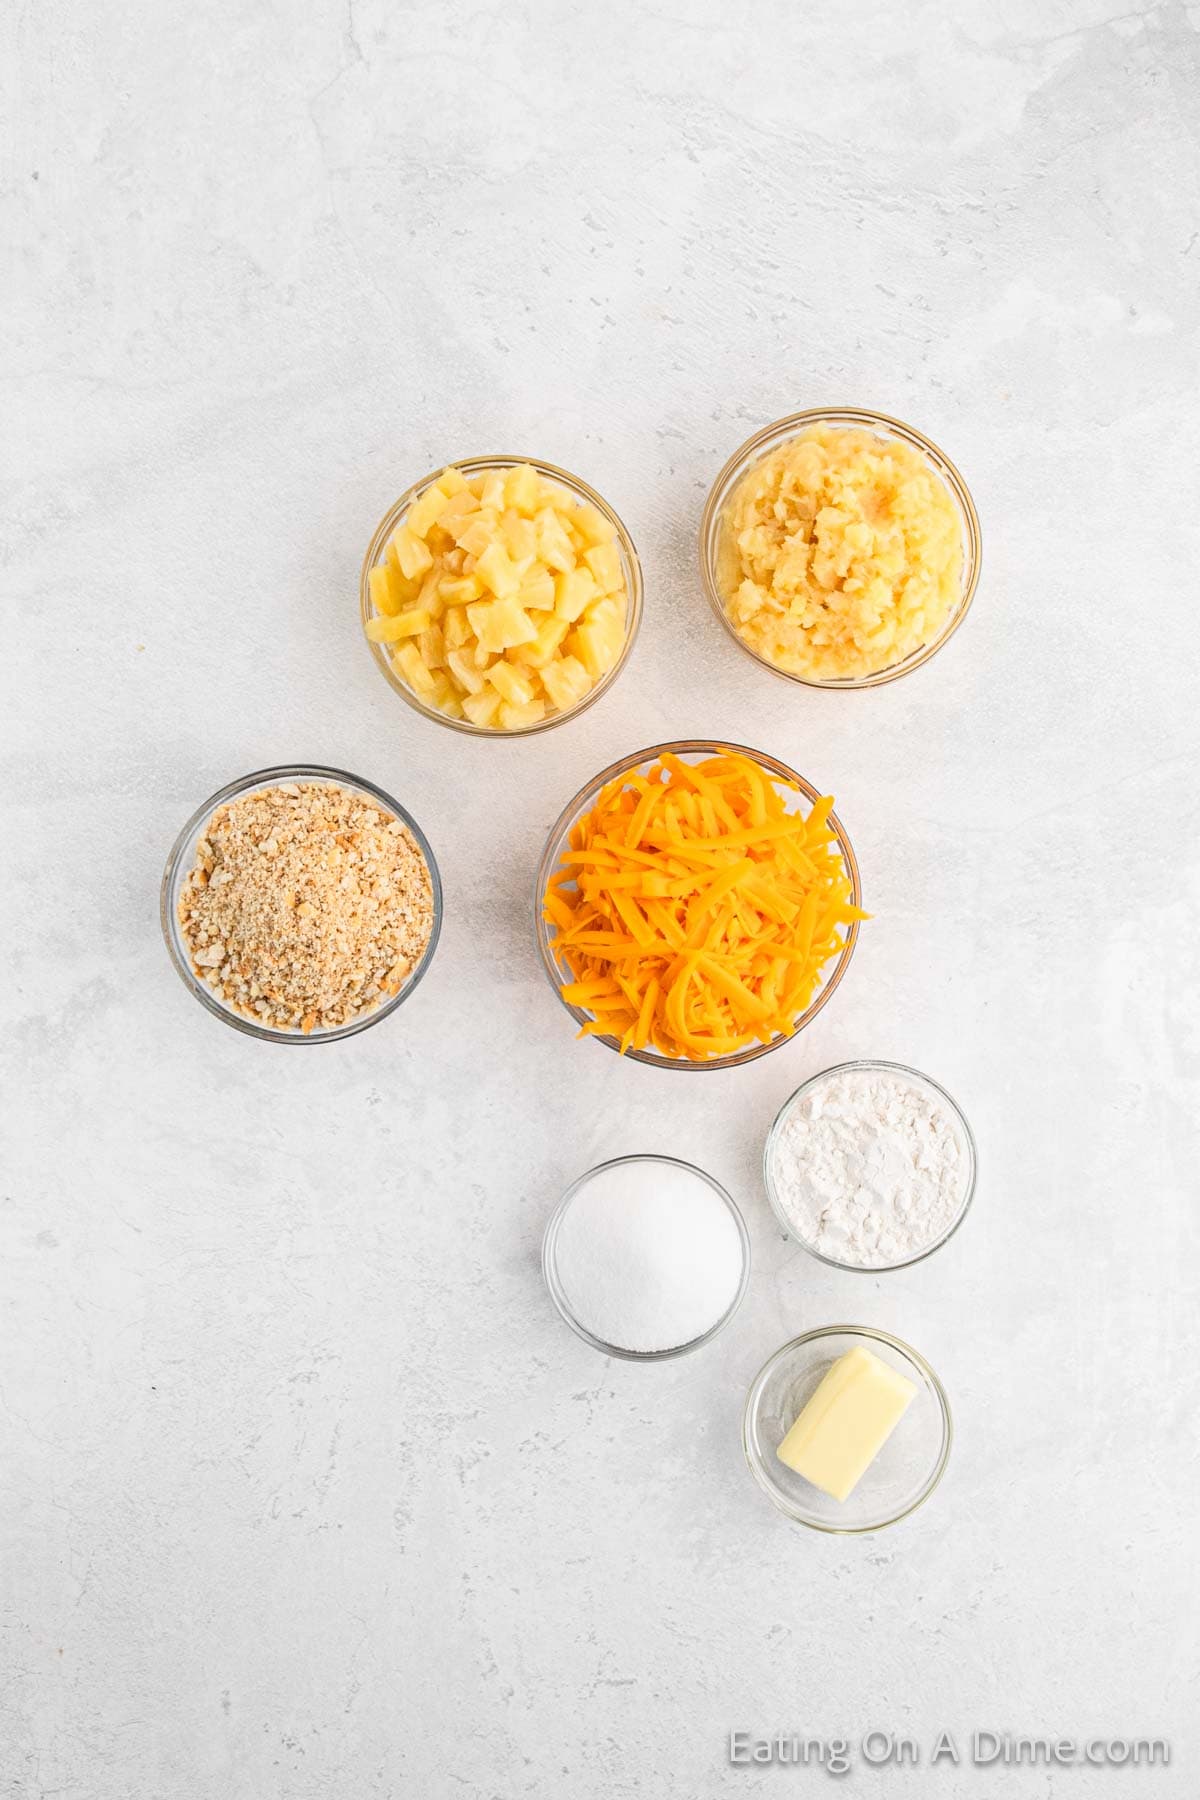 Top view of food ingredients arranged in small bowls on a light surface. The ingredients for a delightful pineapple casserole include chopped potatoes, mashed potatoes, shredded cheddar cheese, breadcrumbs, flour, sugar, and a small piece of butter.